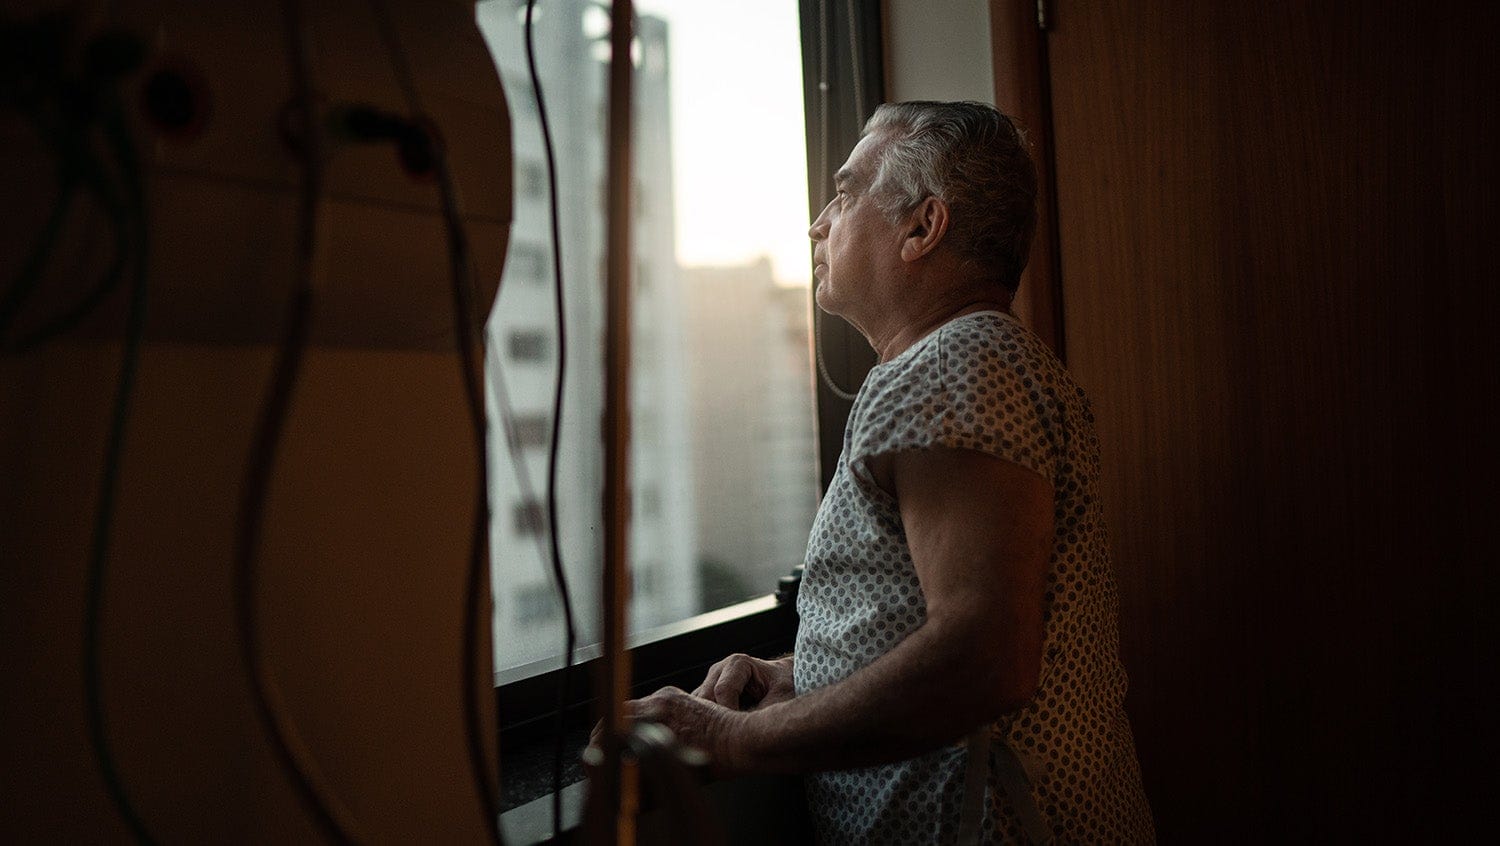 Man in hospital gown looks out room window